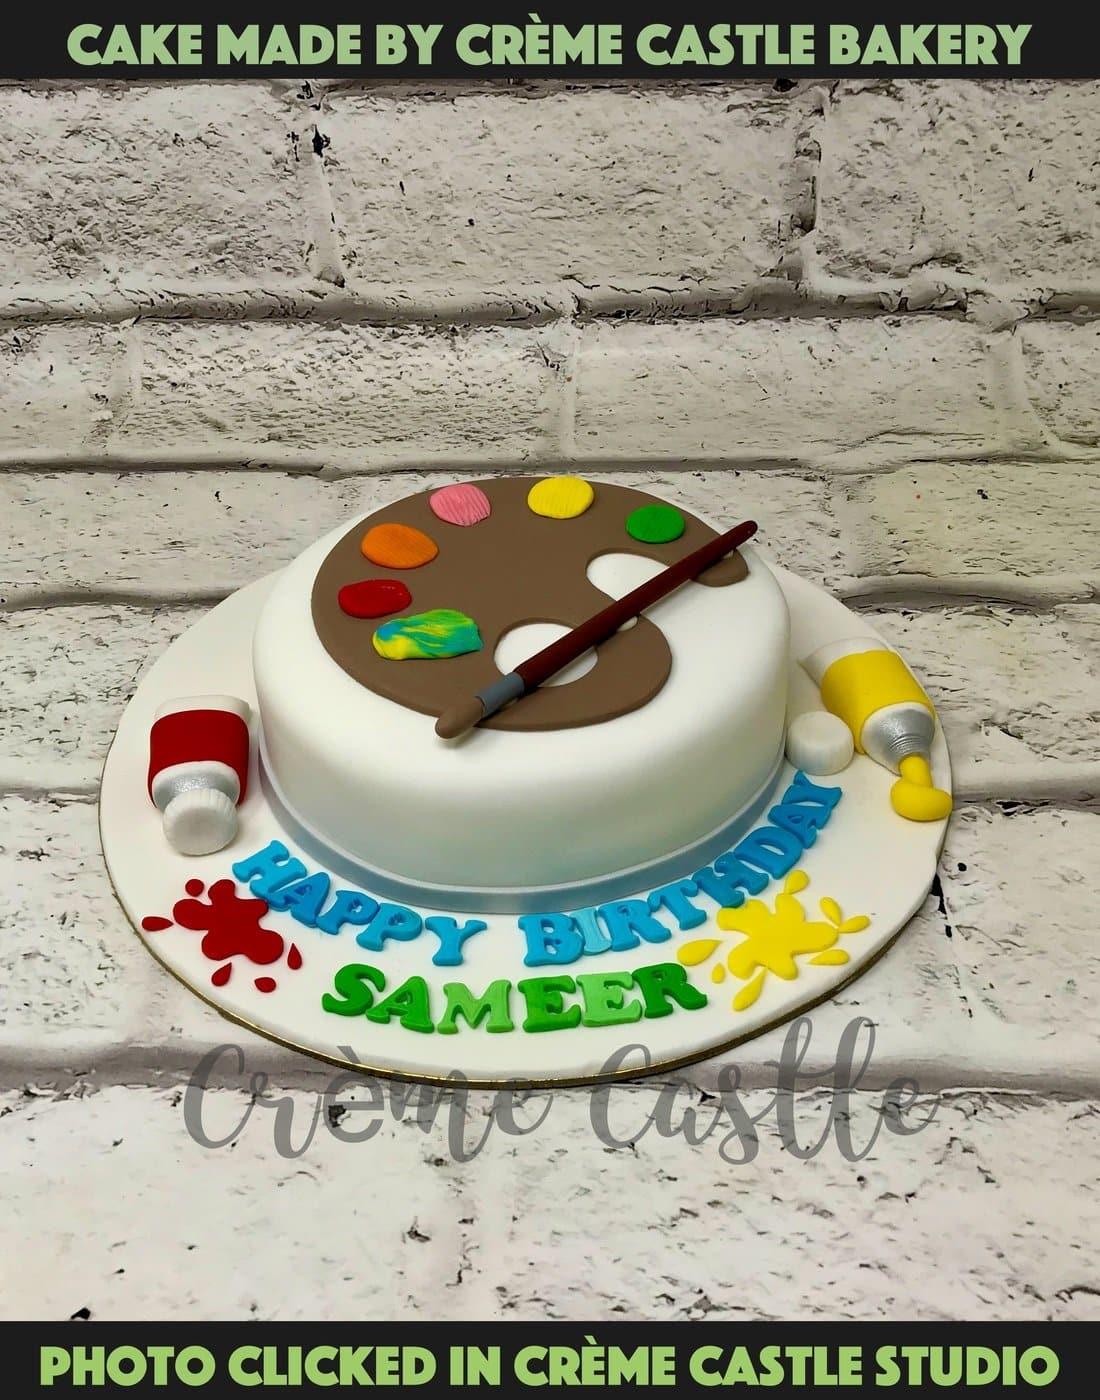 Artistic Cake Crafters - Home of Exquisite Cake Artistry